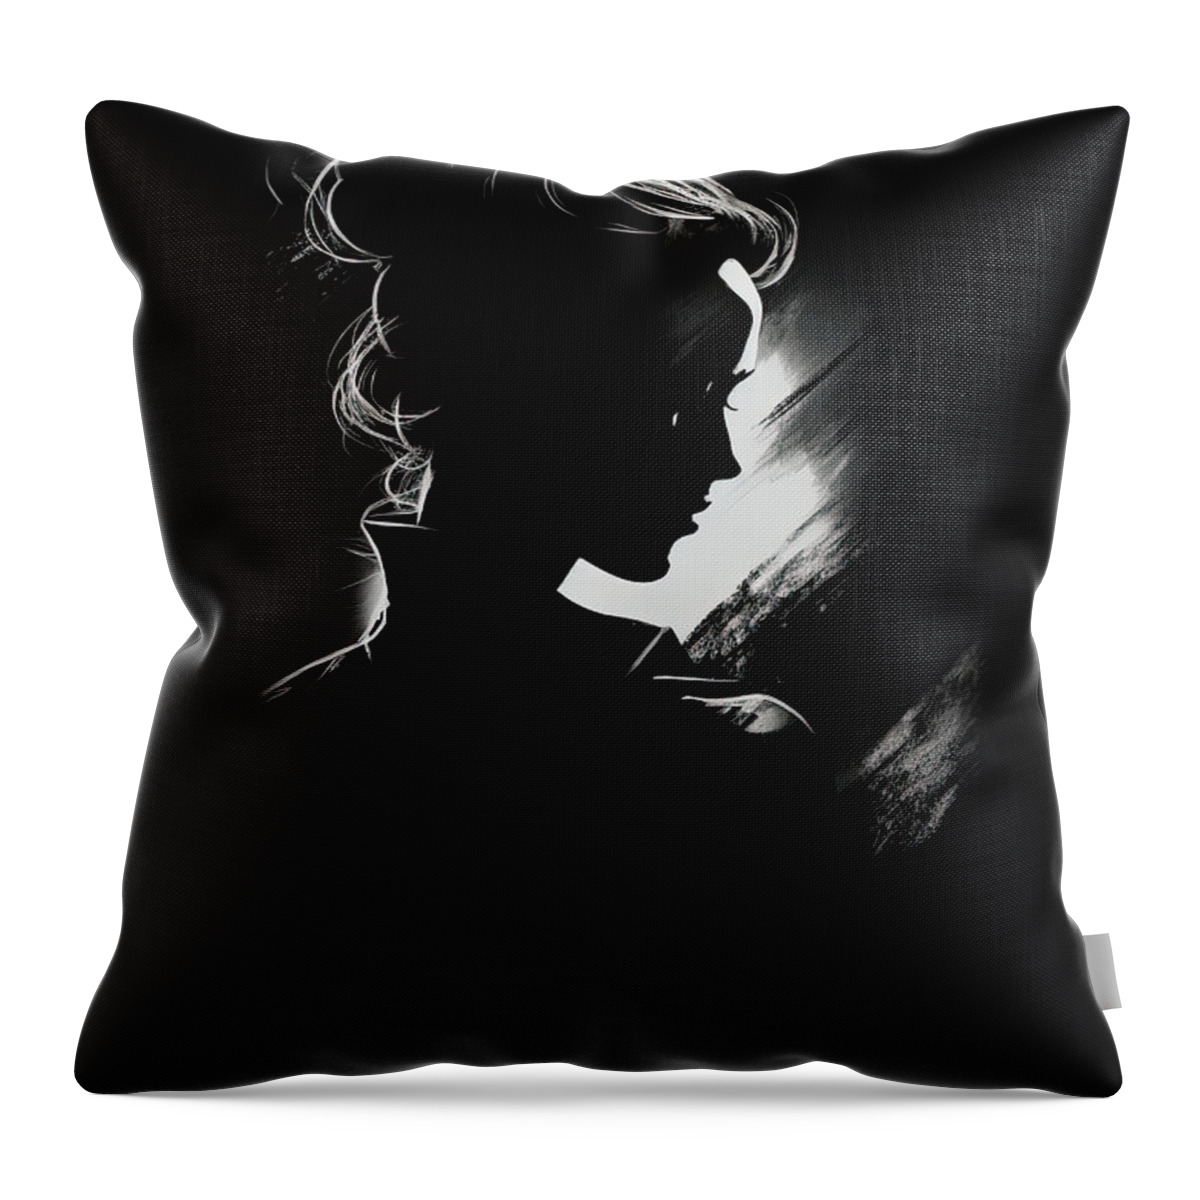 Sensual Throw Pillow featuring the digital art Sensual Black and White No.2 by My Head Cinema